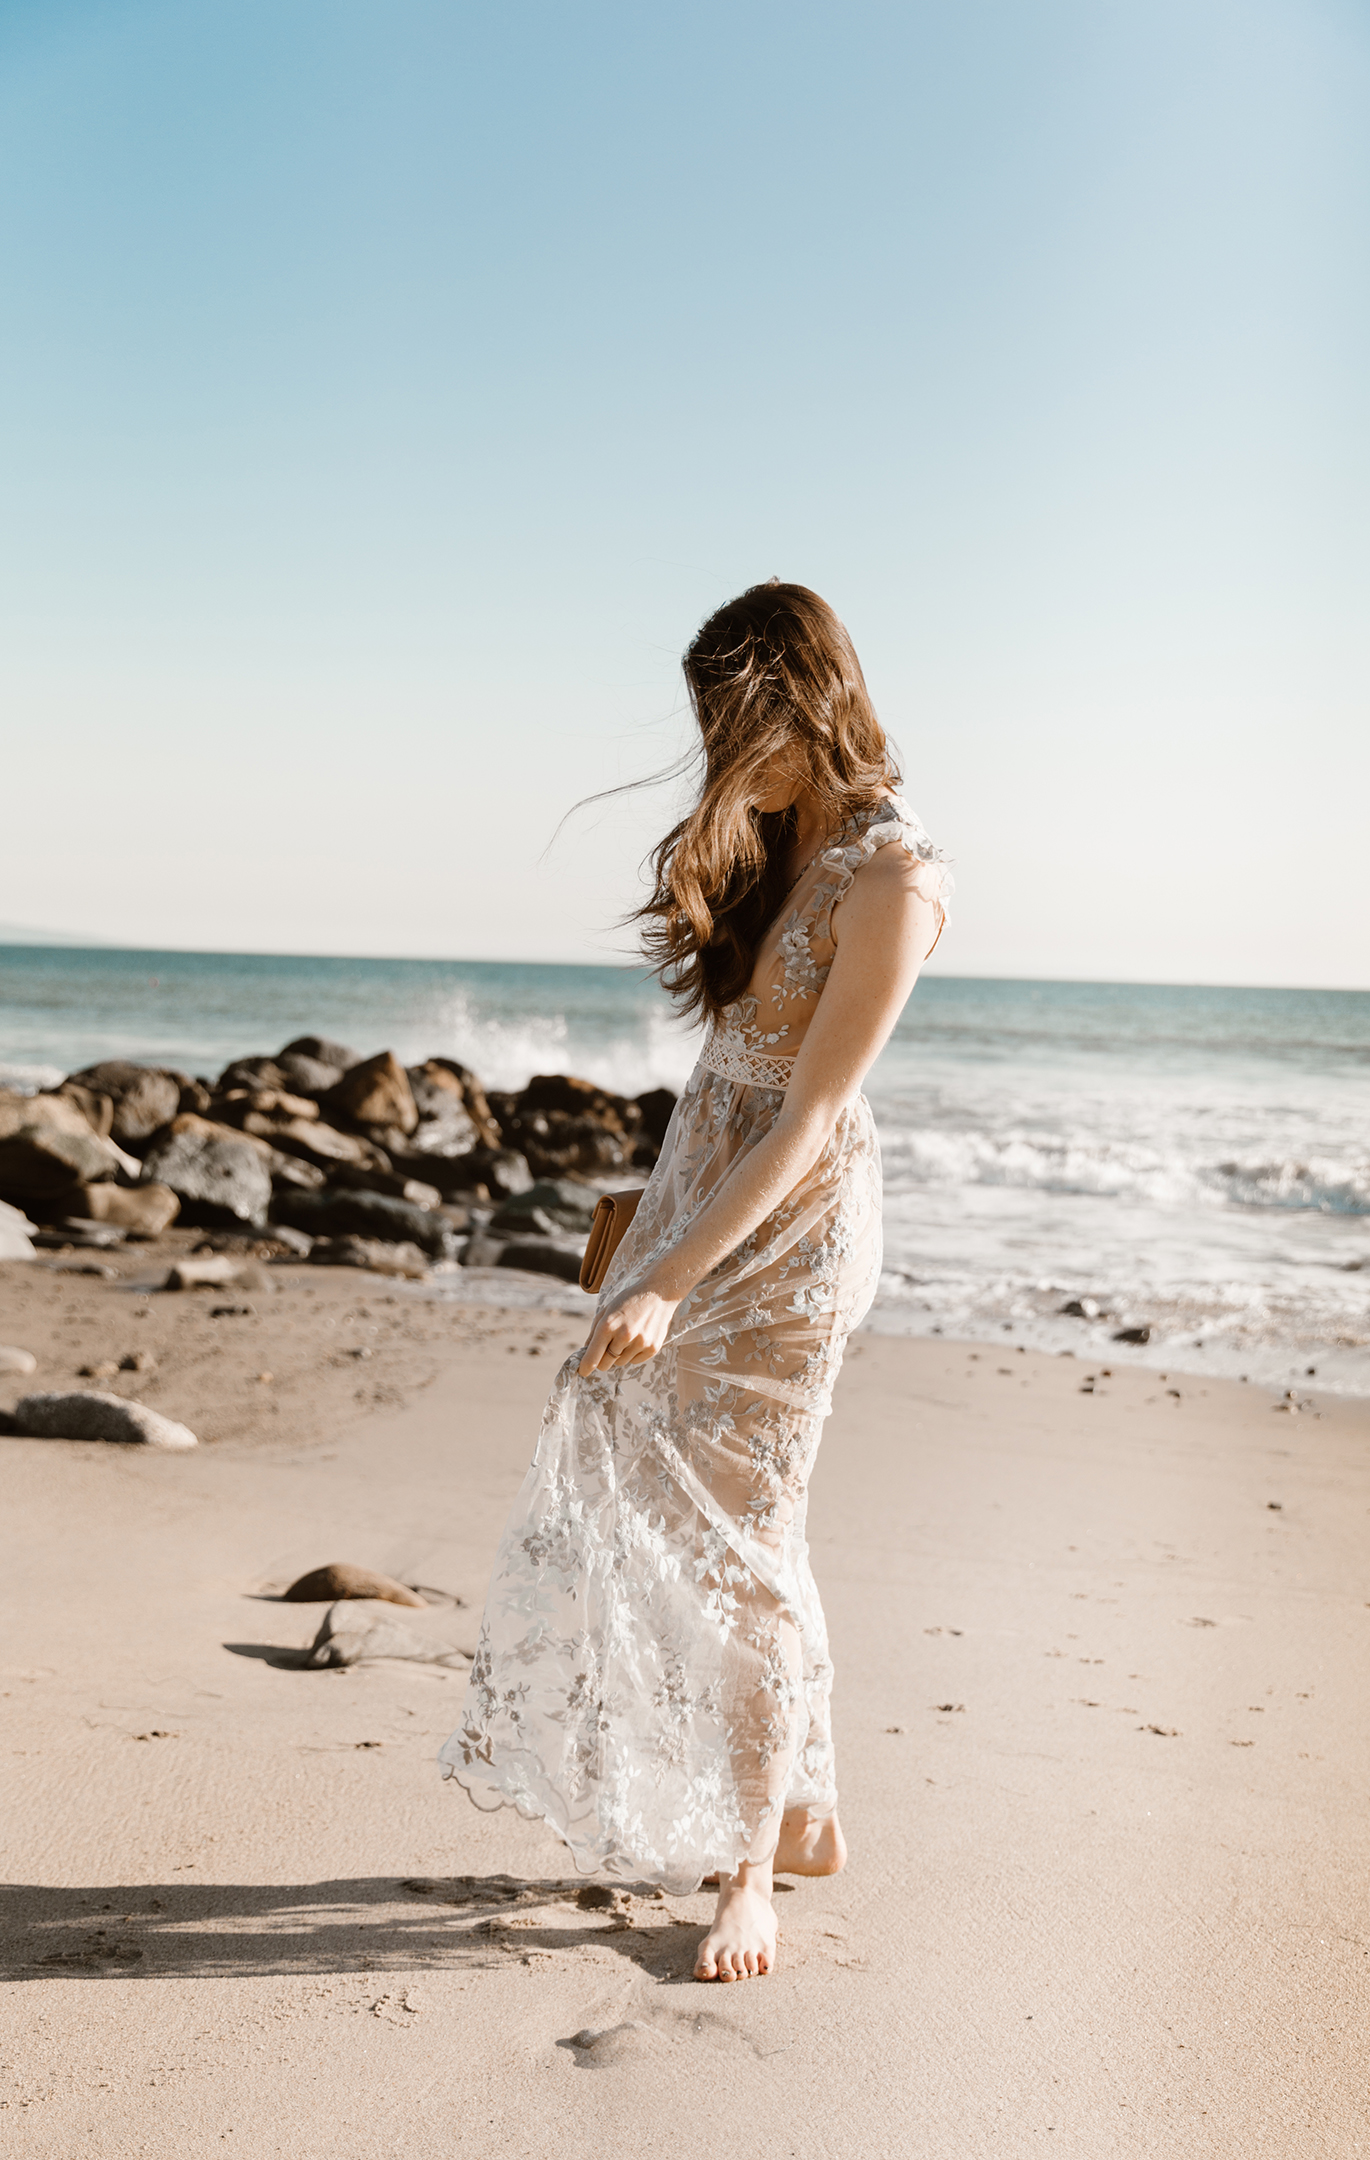 What to wear to a beach wedding